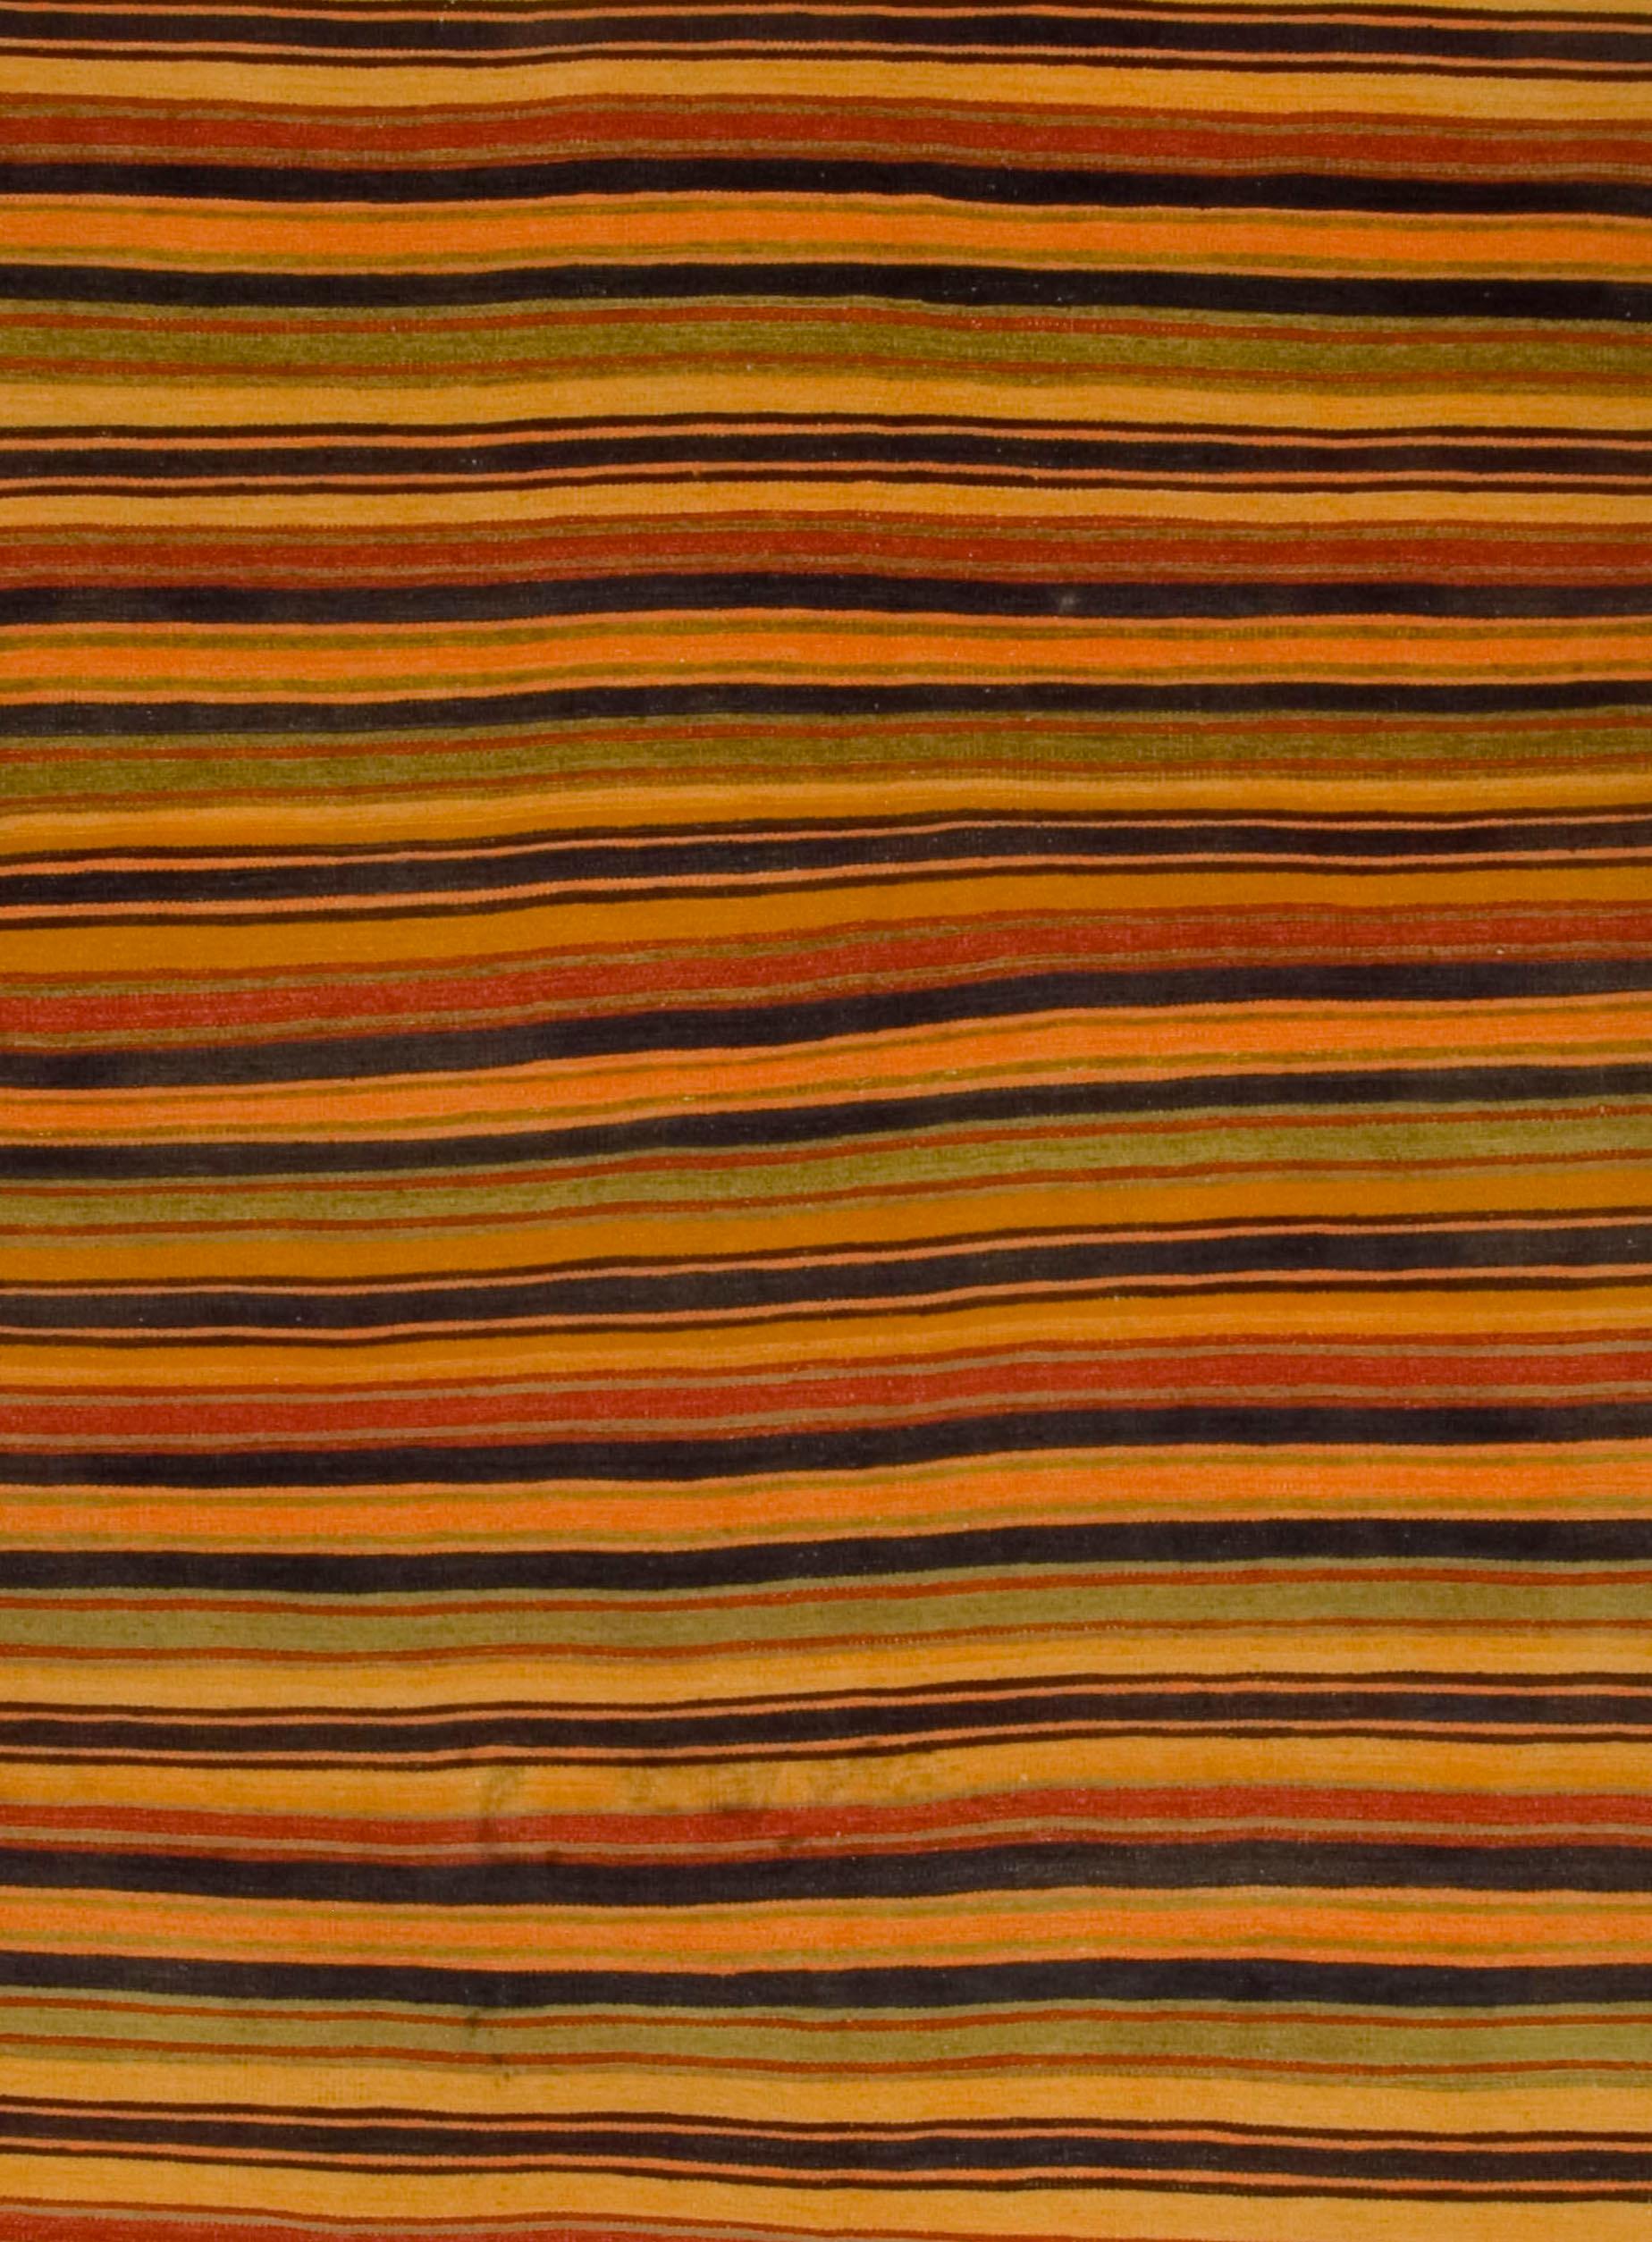 Vintage Turkish Kilim rug. Vintage striped Turkish Kilim handwoven in the 1950s. The simplicity and boldness of these pieces can also give a contemporary feel and can look at home in both a modern or traditional setting. Colors: gold/orange/multi.